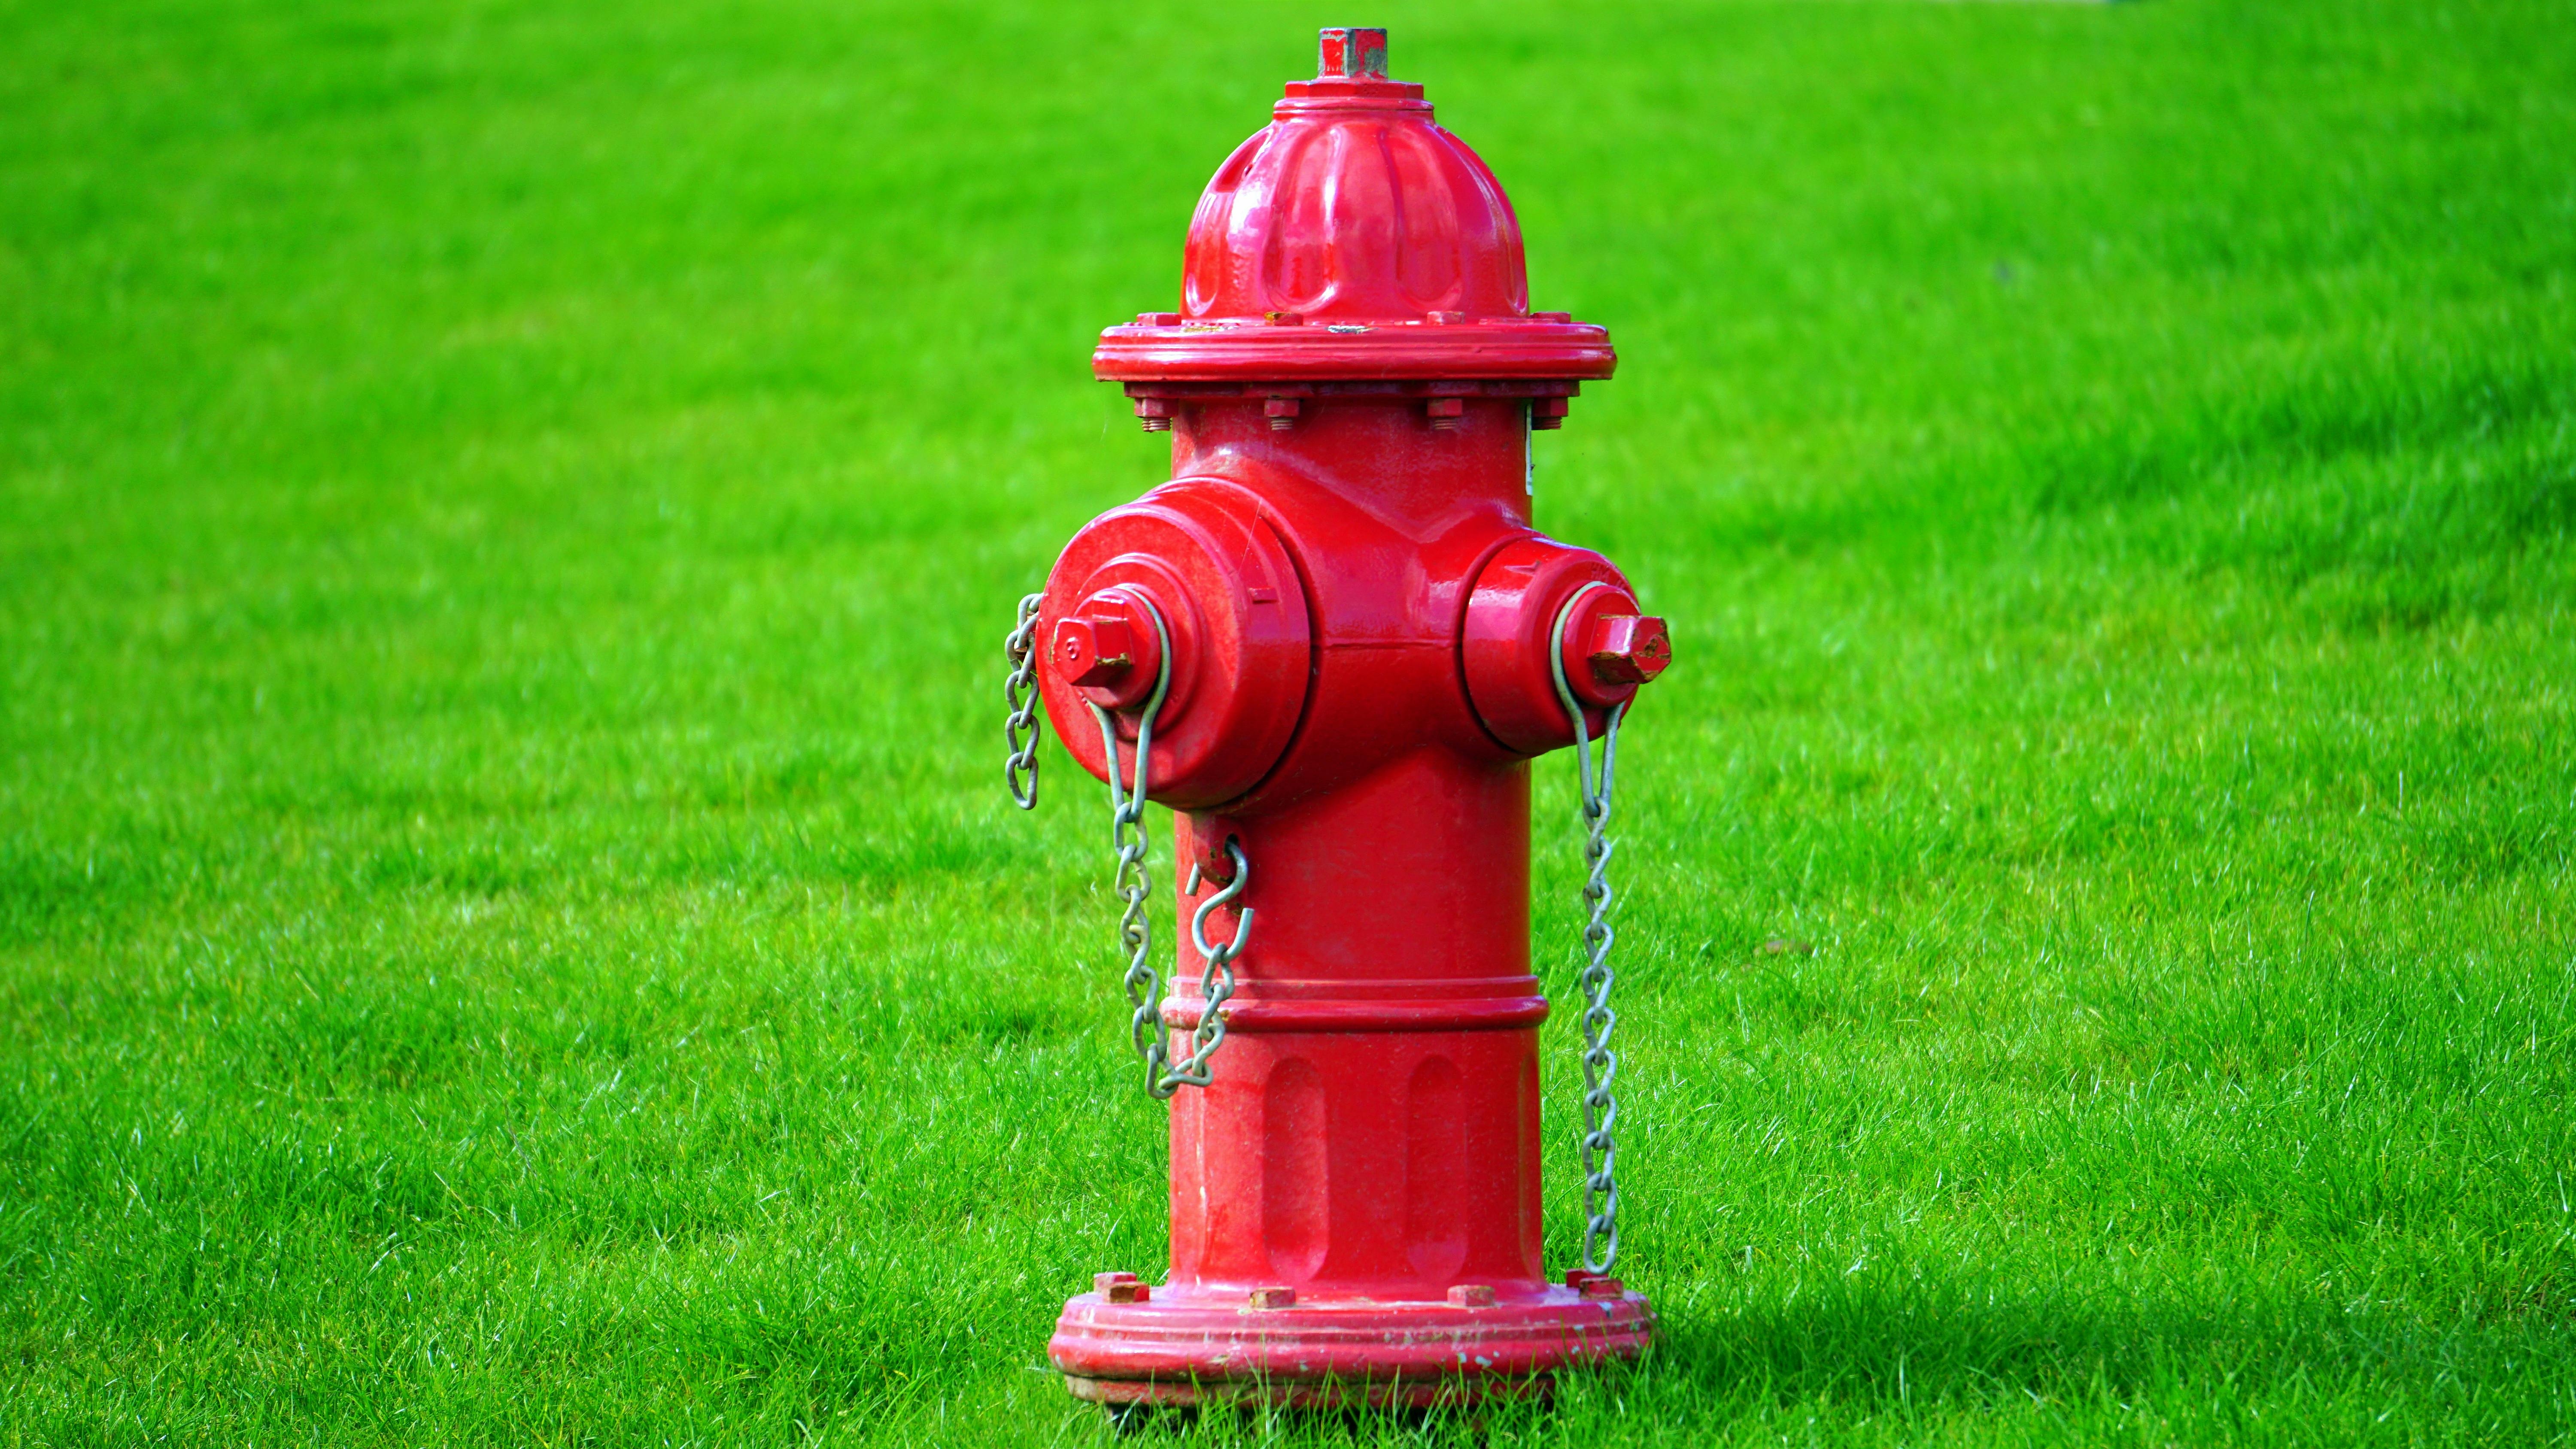 A shiny red fire hydrant surrounded by bright green grass